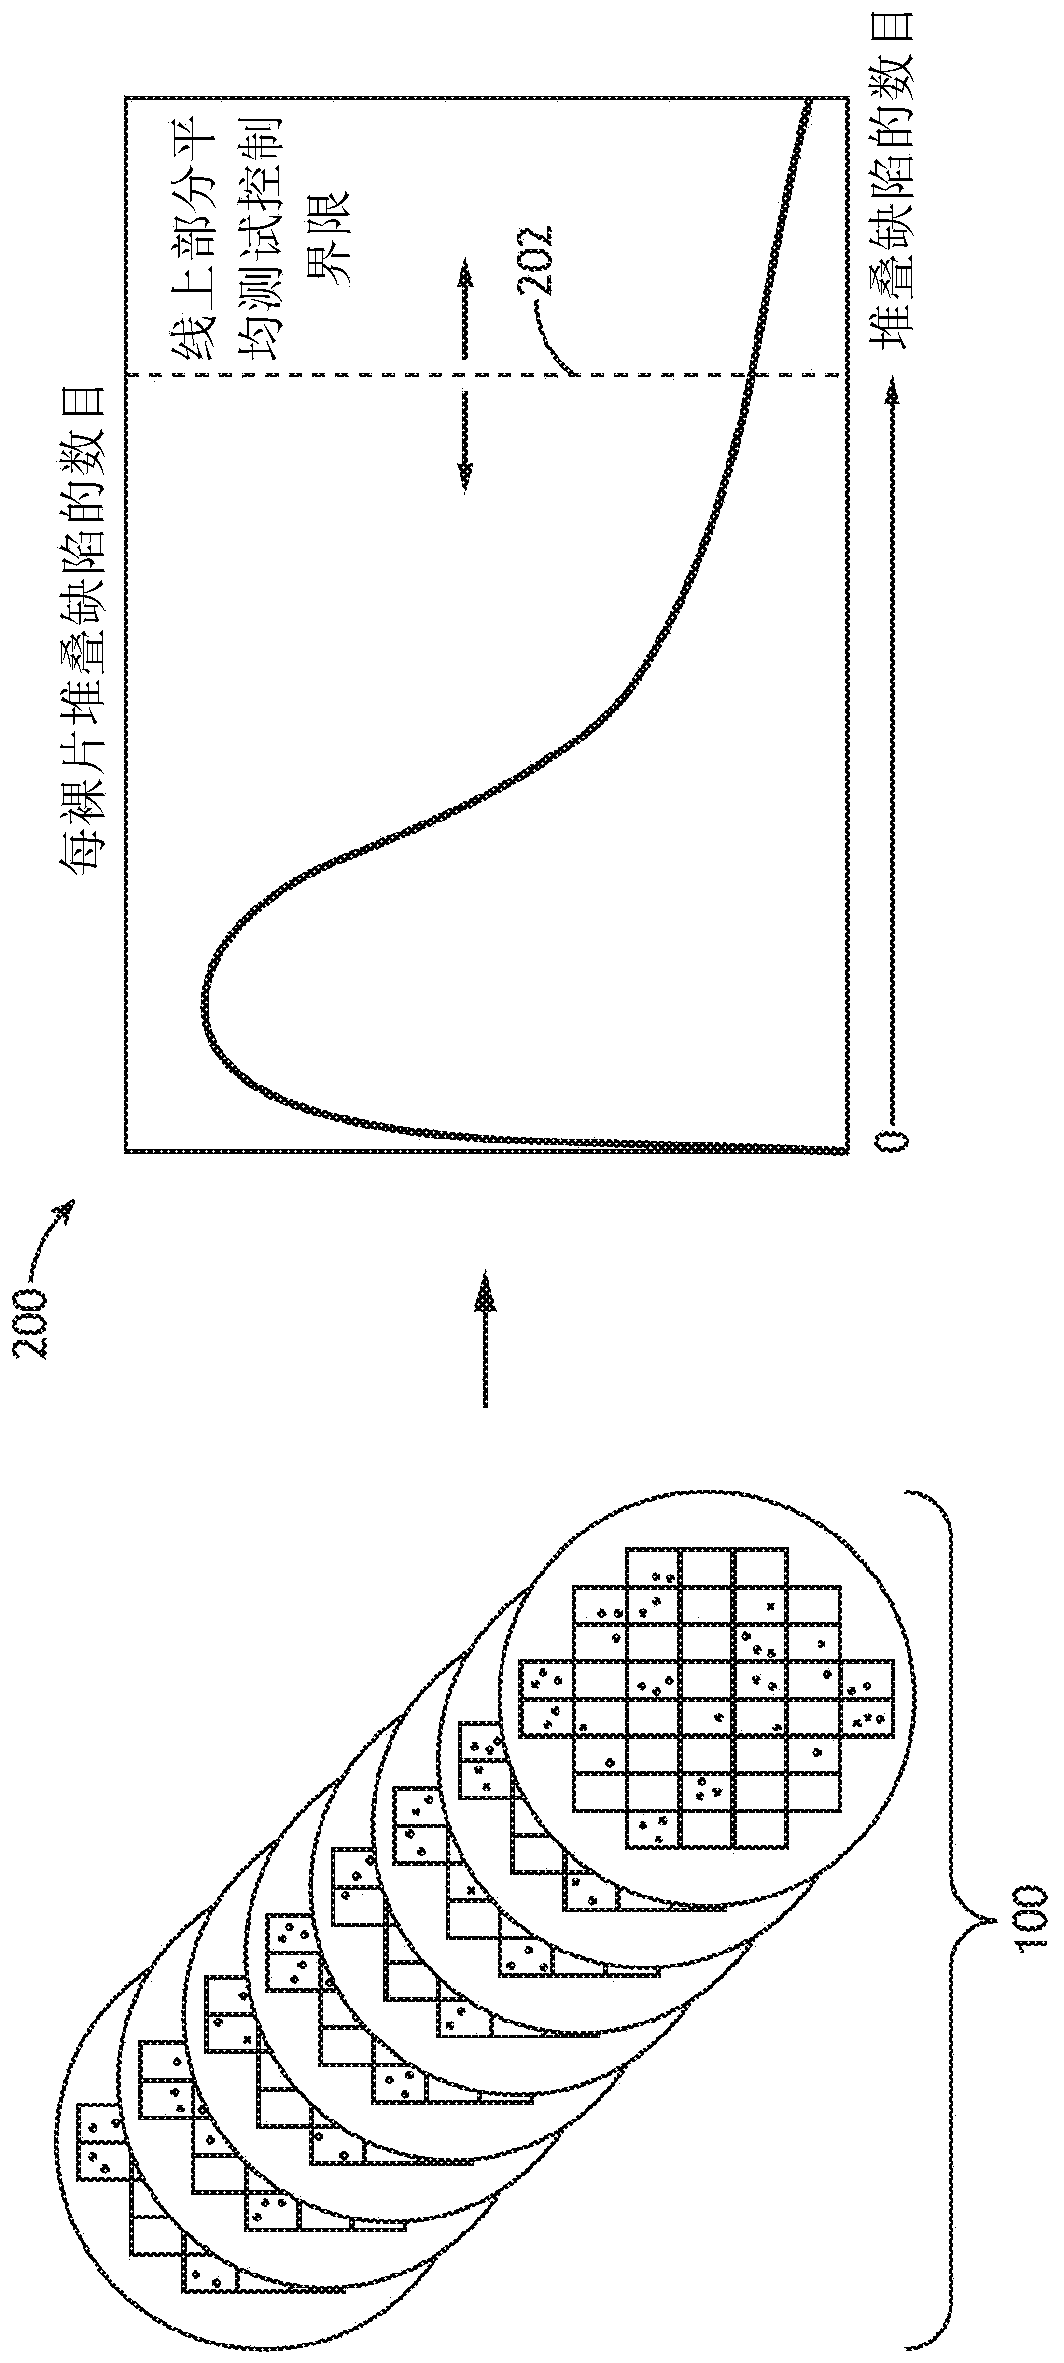 Methods and systems for inline parts average testing and latent reliability defect detection